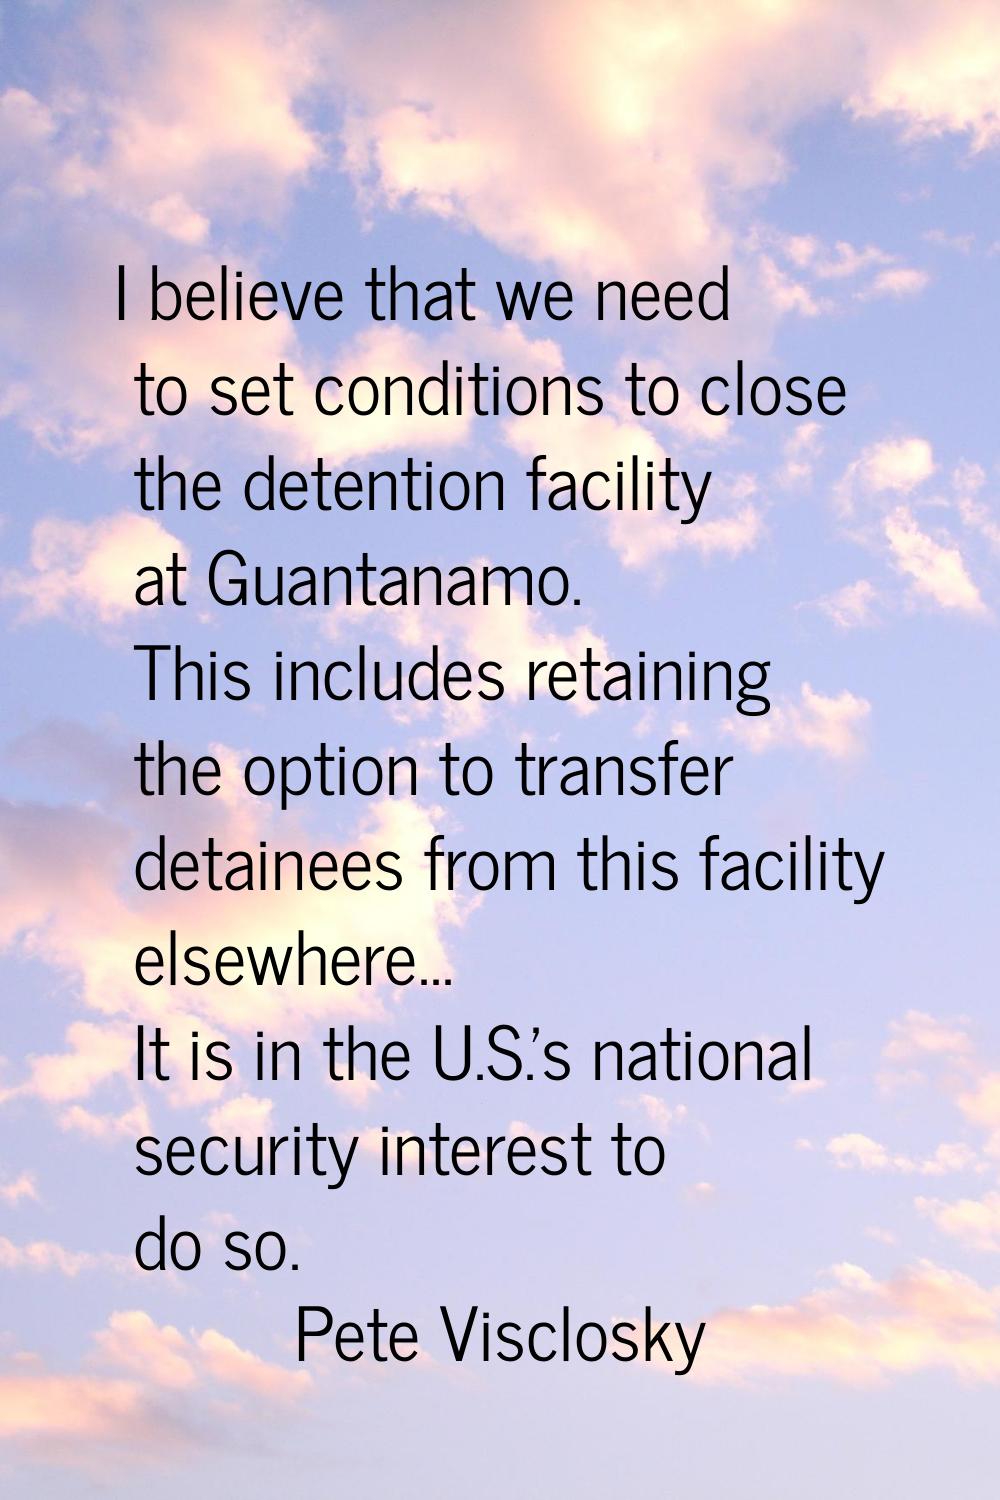 I believe that we need to set conditions to close the detention facility at Guantanamo. This includ